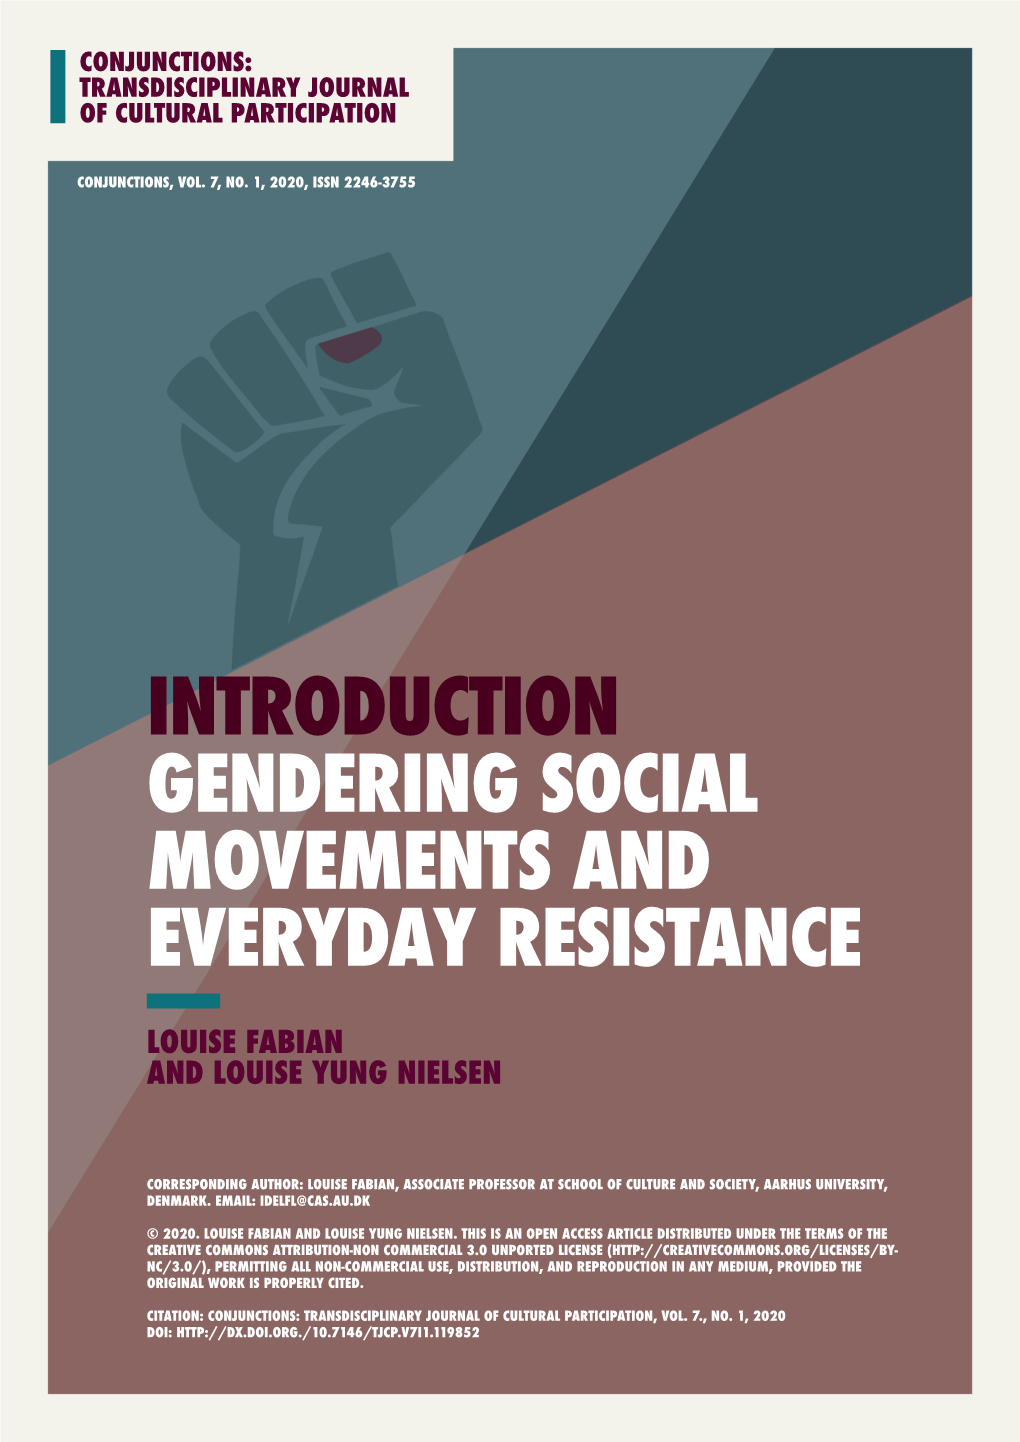 Introduction Gendering Social Movements and Everyday Resistance